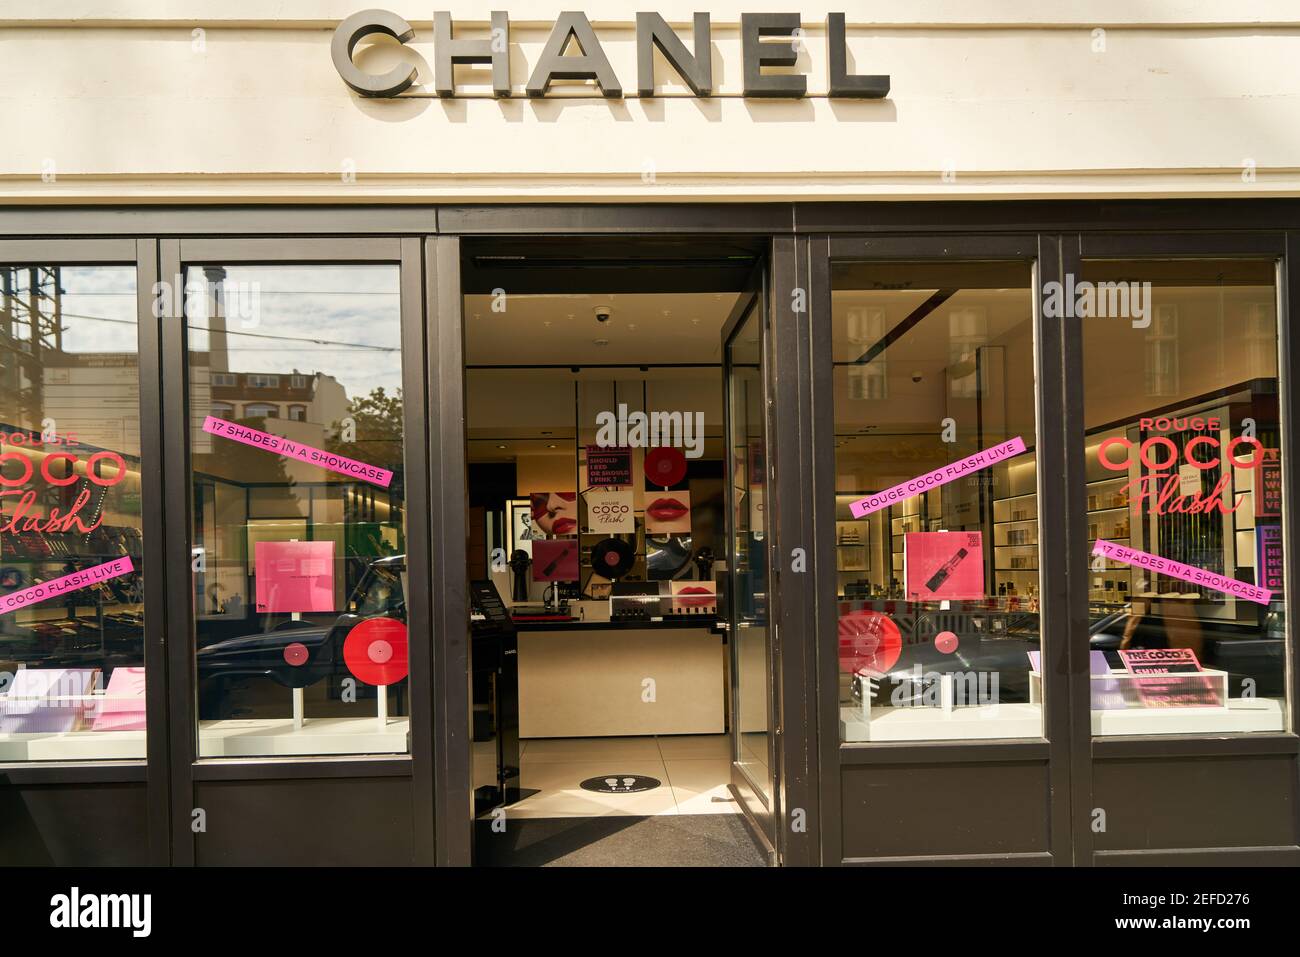 BERLIN, July 2020: Chanel brand store with open door at daytime Stock Photo